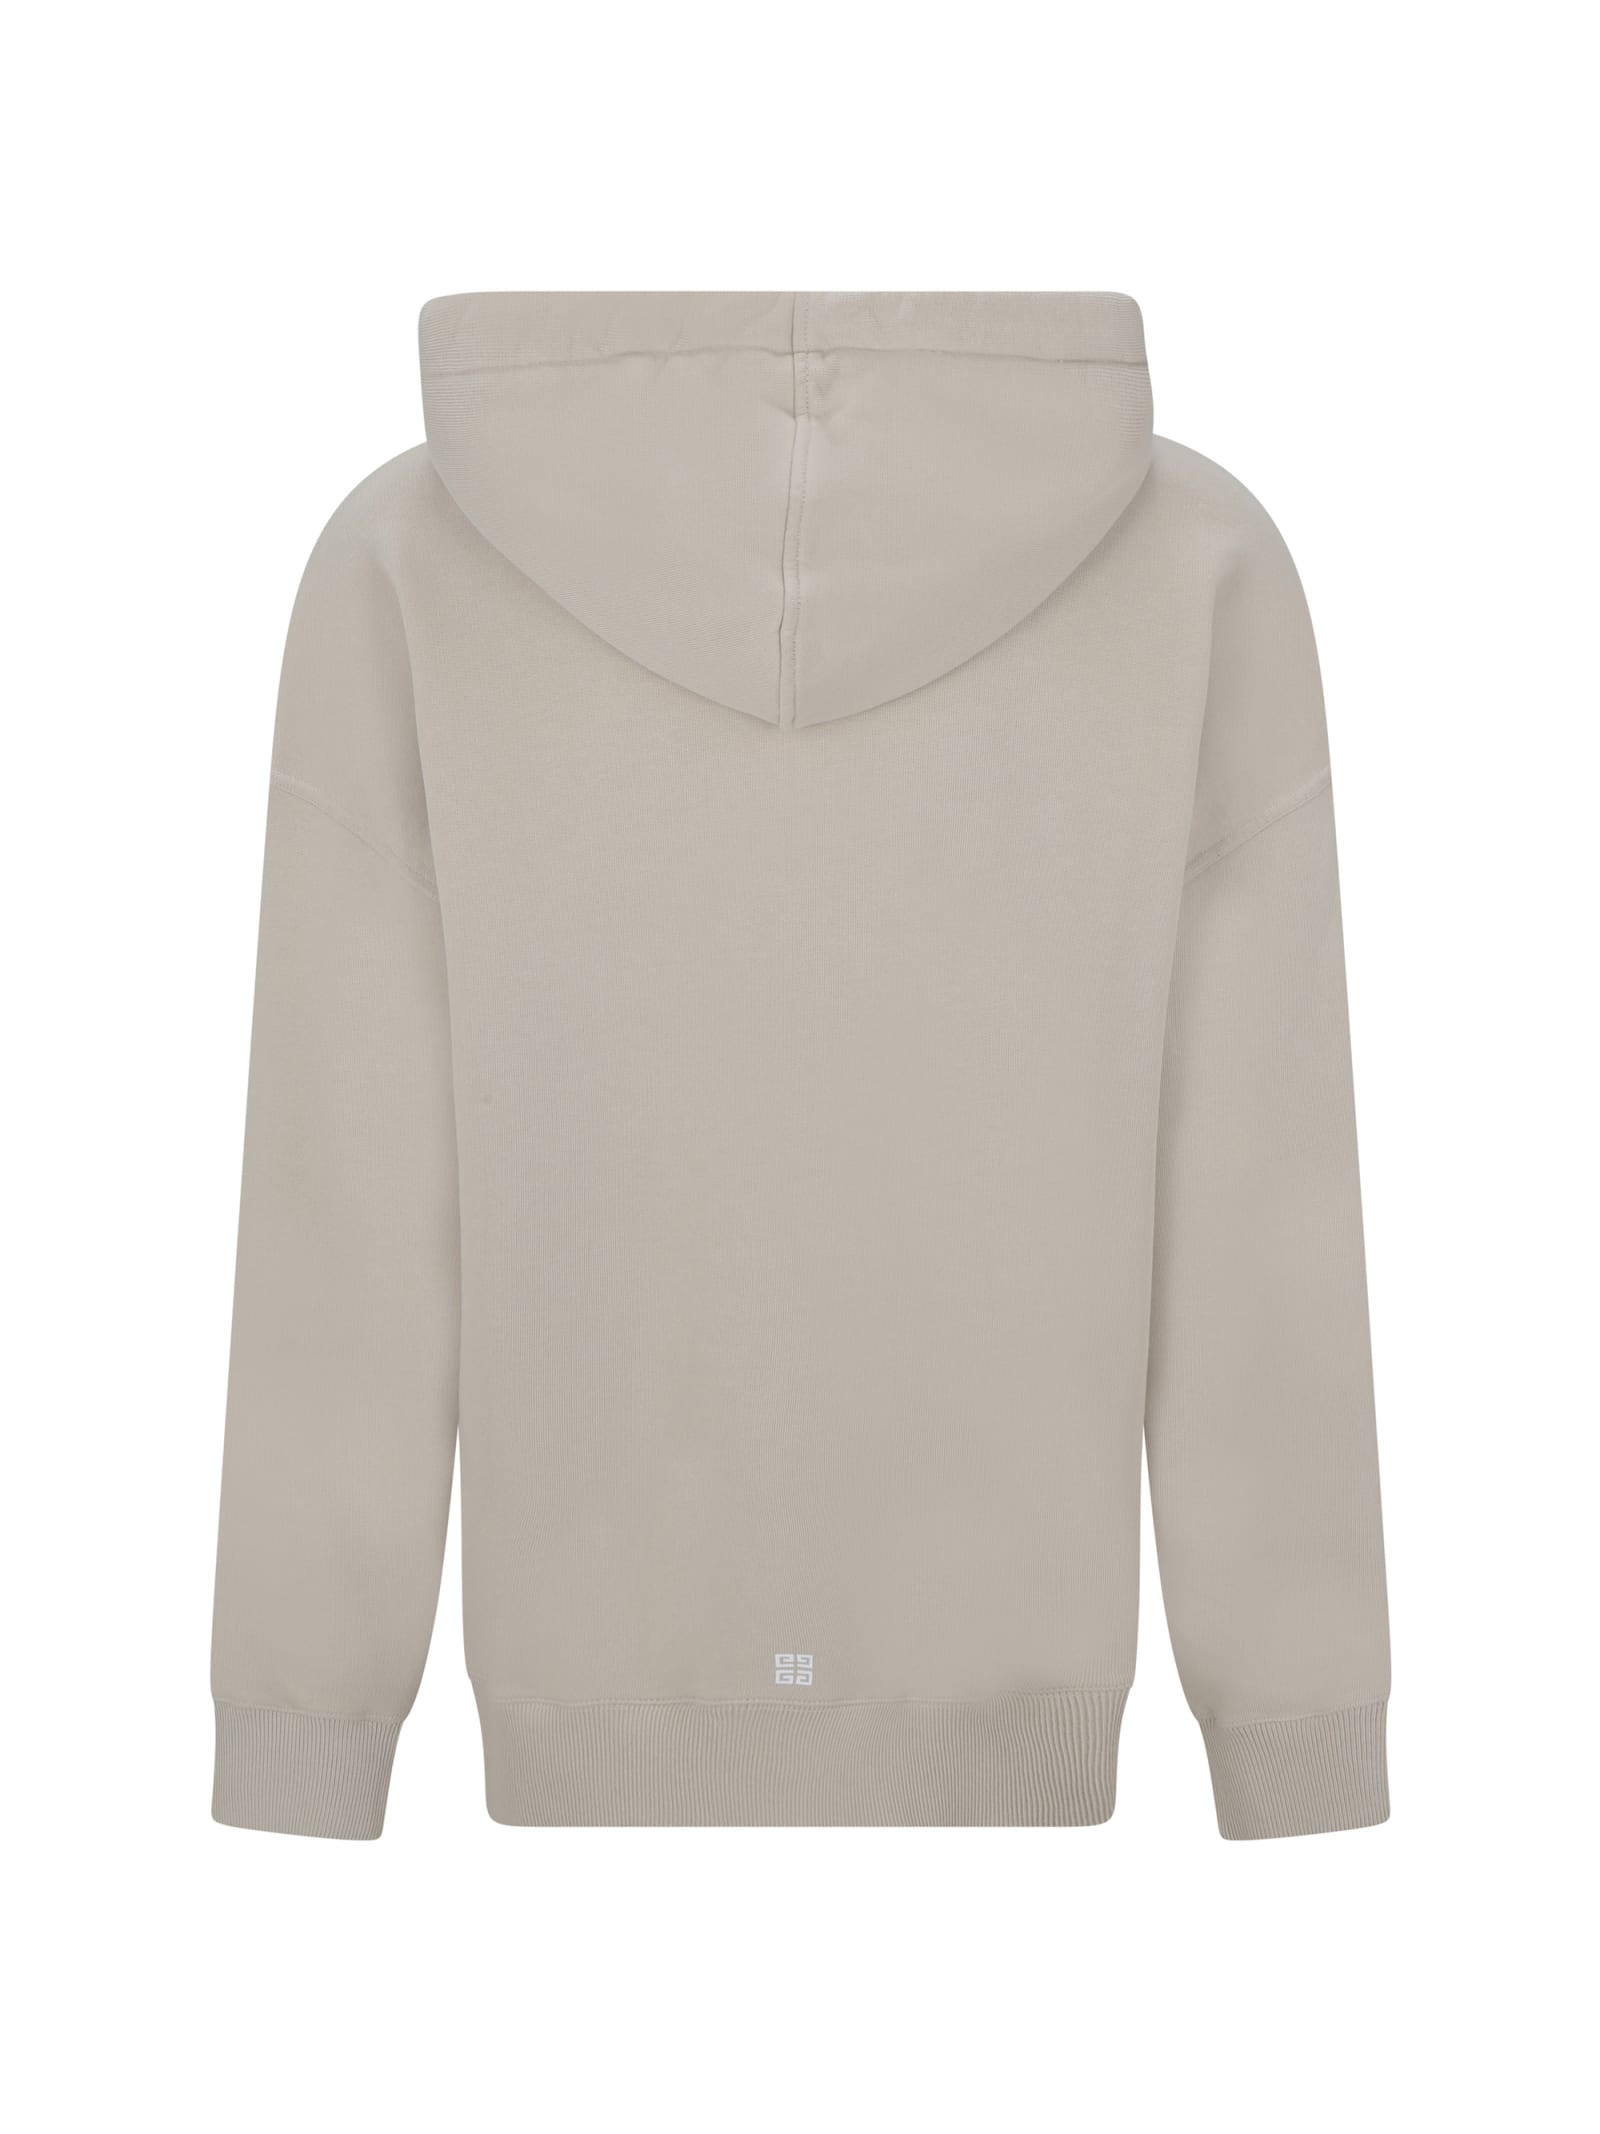 Shop Givenchy Hoodie In Grey